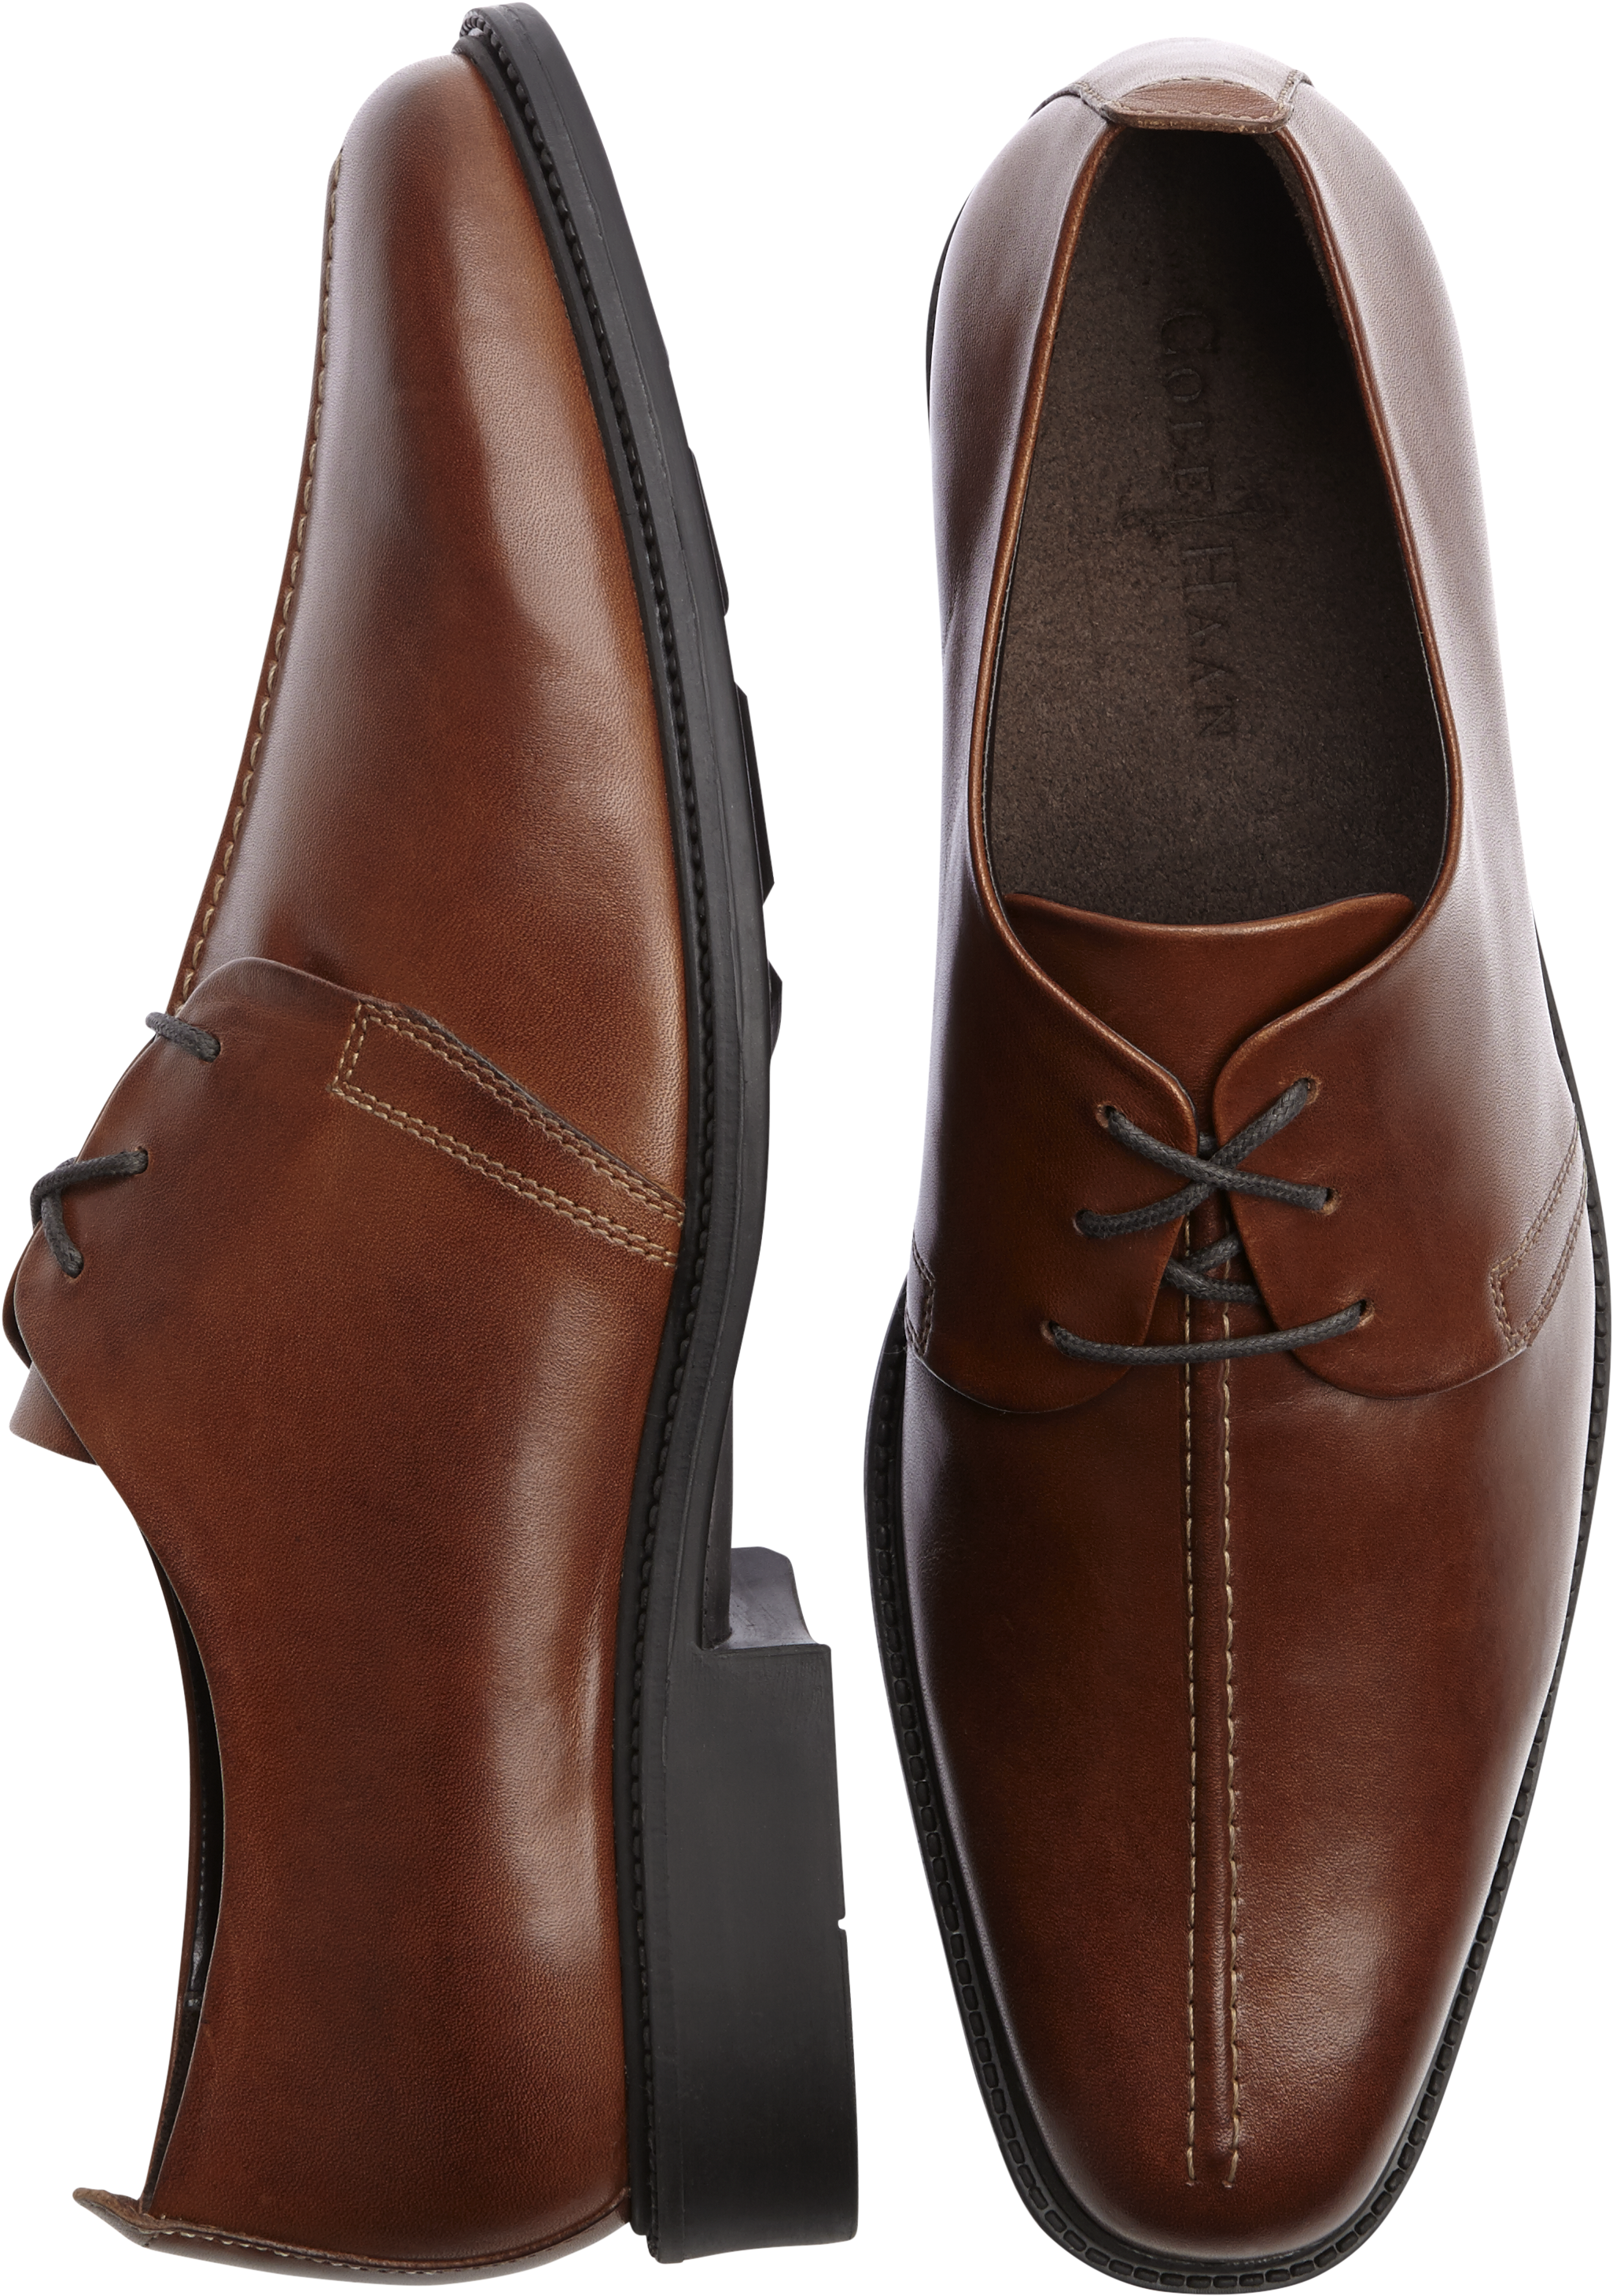 Mens Leather Sole Shoes | Men's Wearhouse | Male Leather Sole Shoes ...